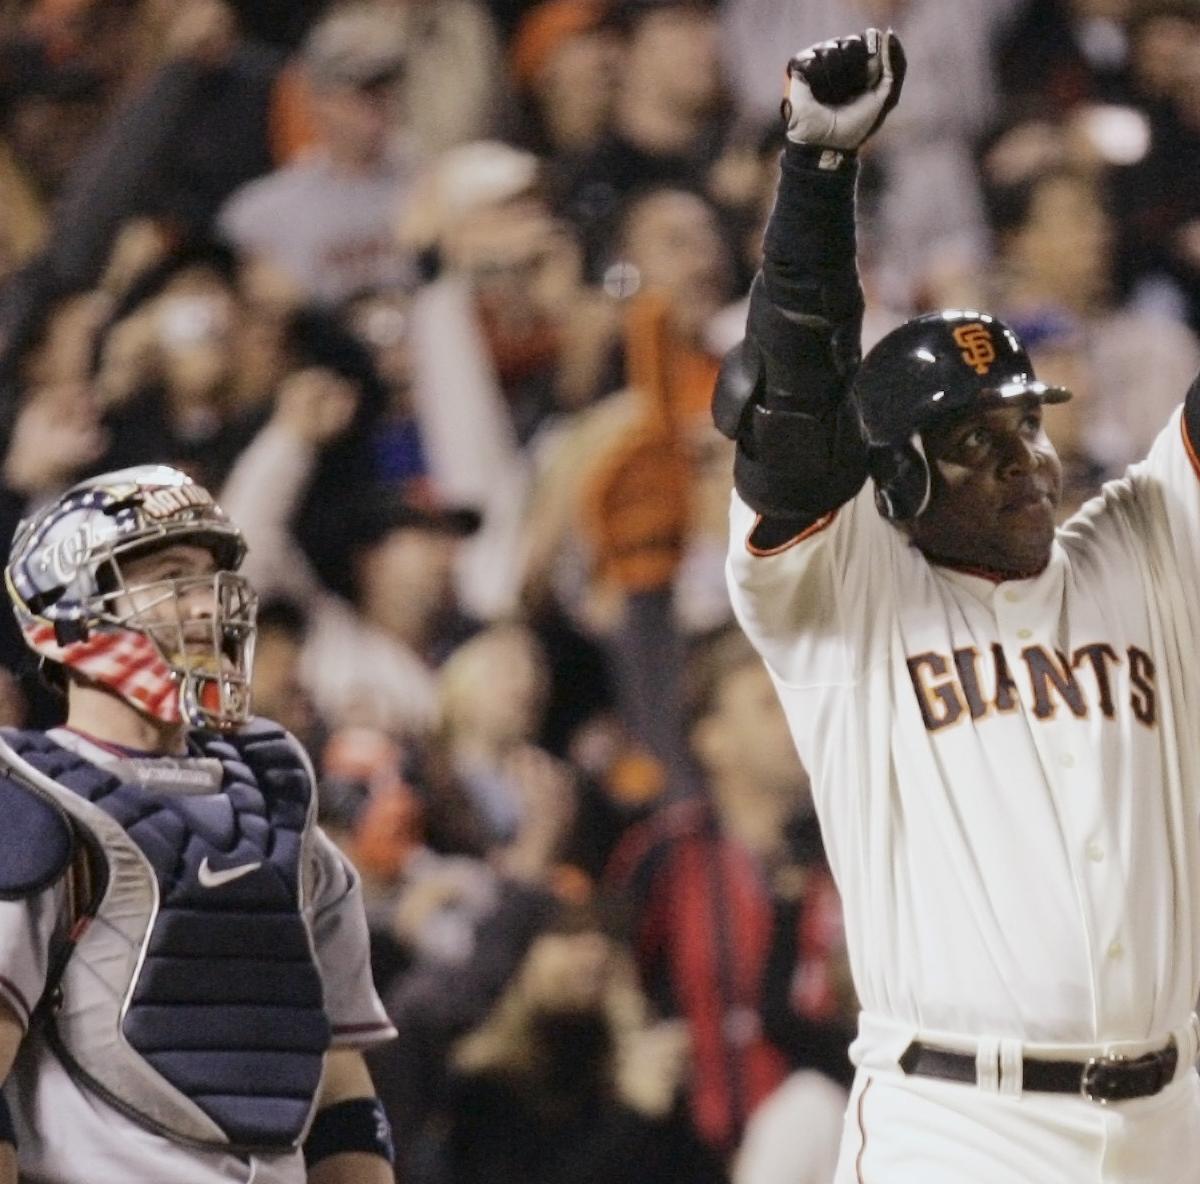 Barry Bonds Hits Home Run at Age 52